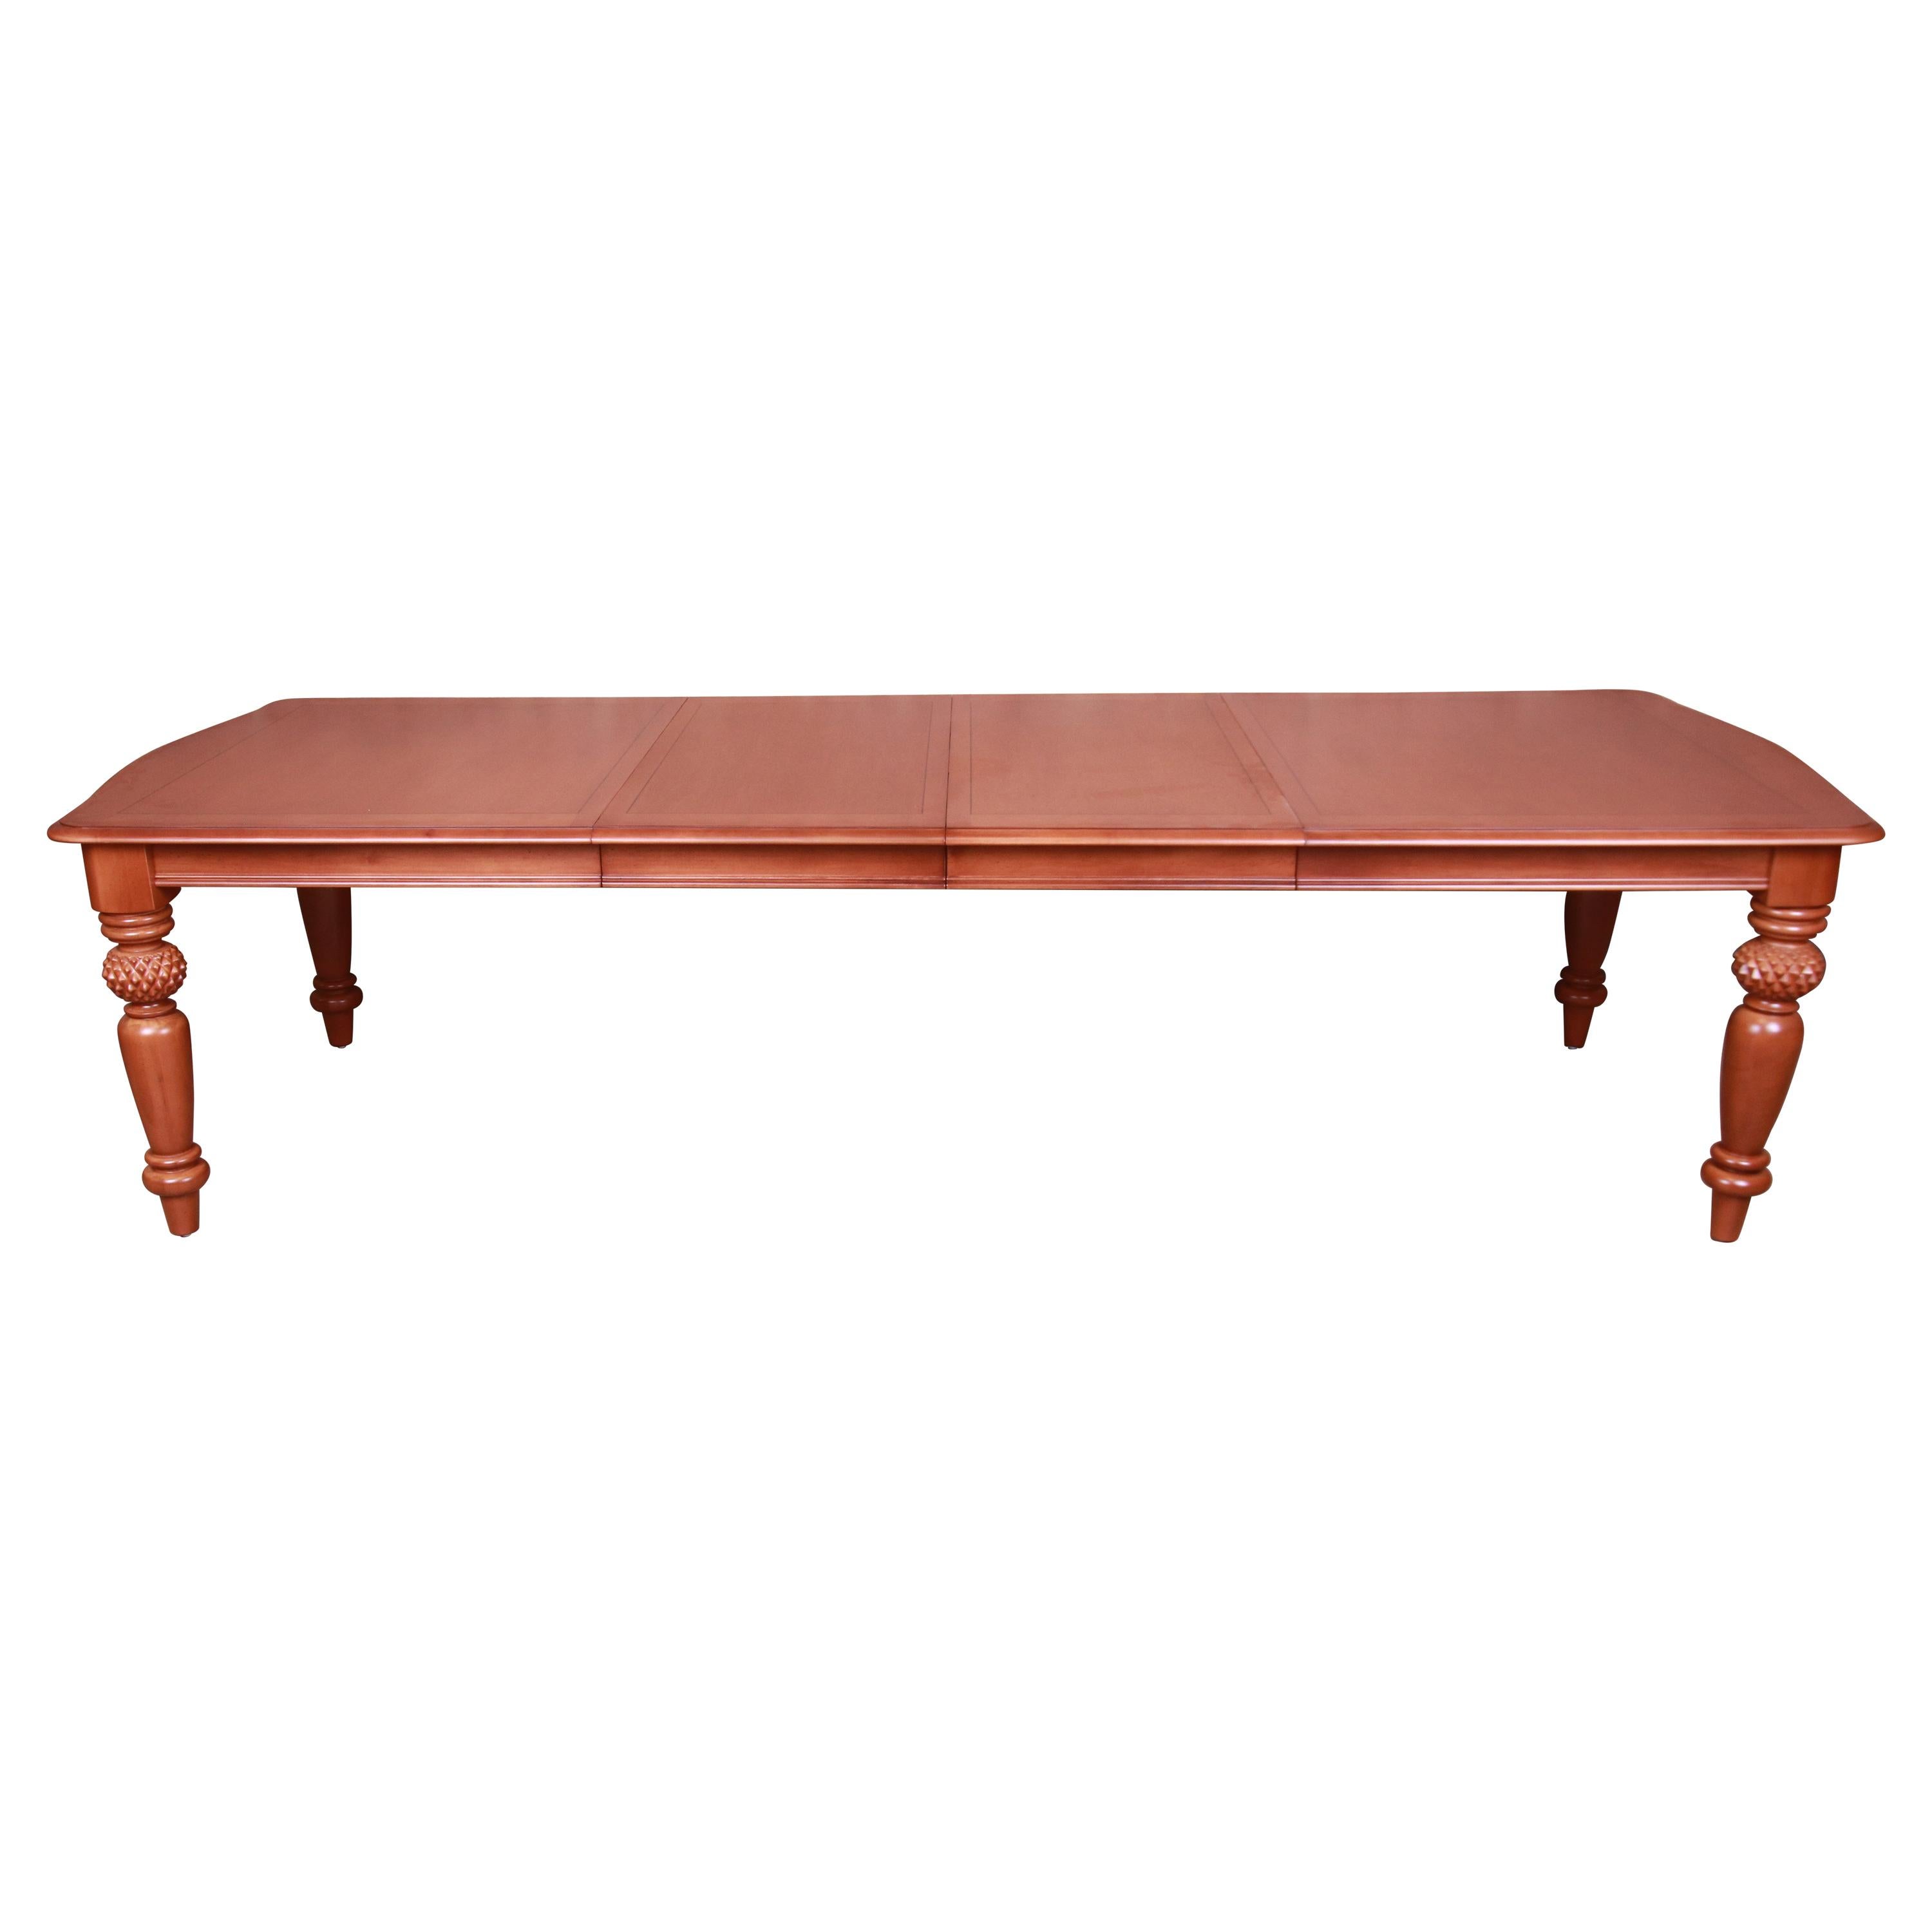 Lexington Tommy Bahama Collection Maple Extension Dining Table, Newly Refinished